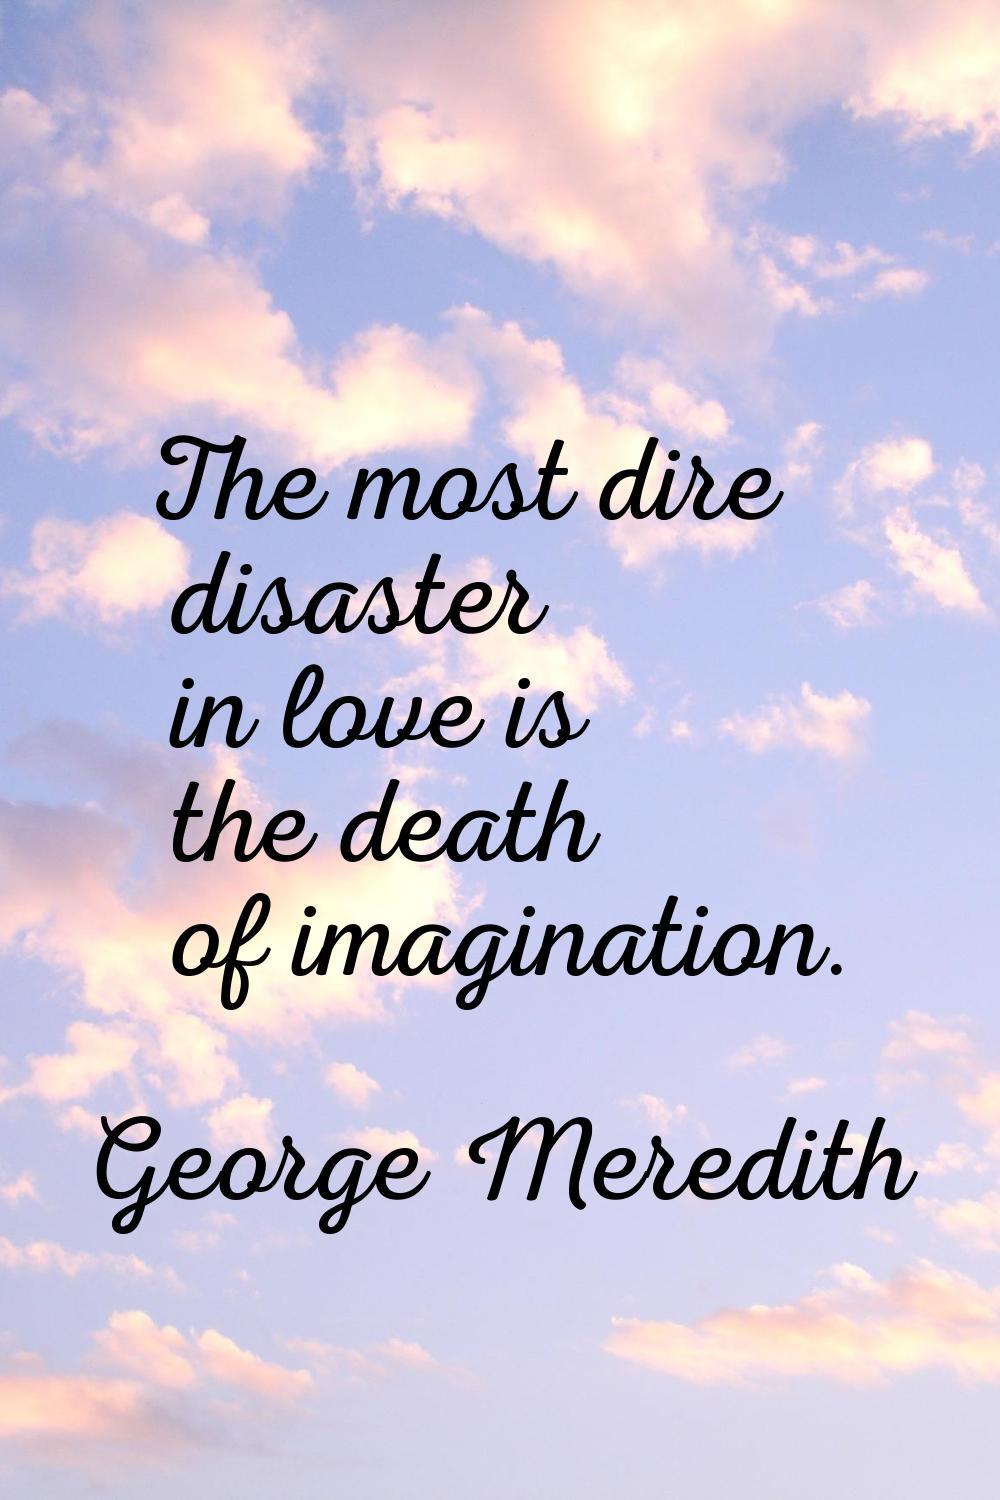 The most dire disaster in love is the death of imagination.